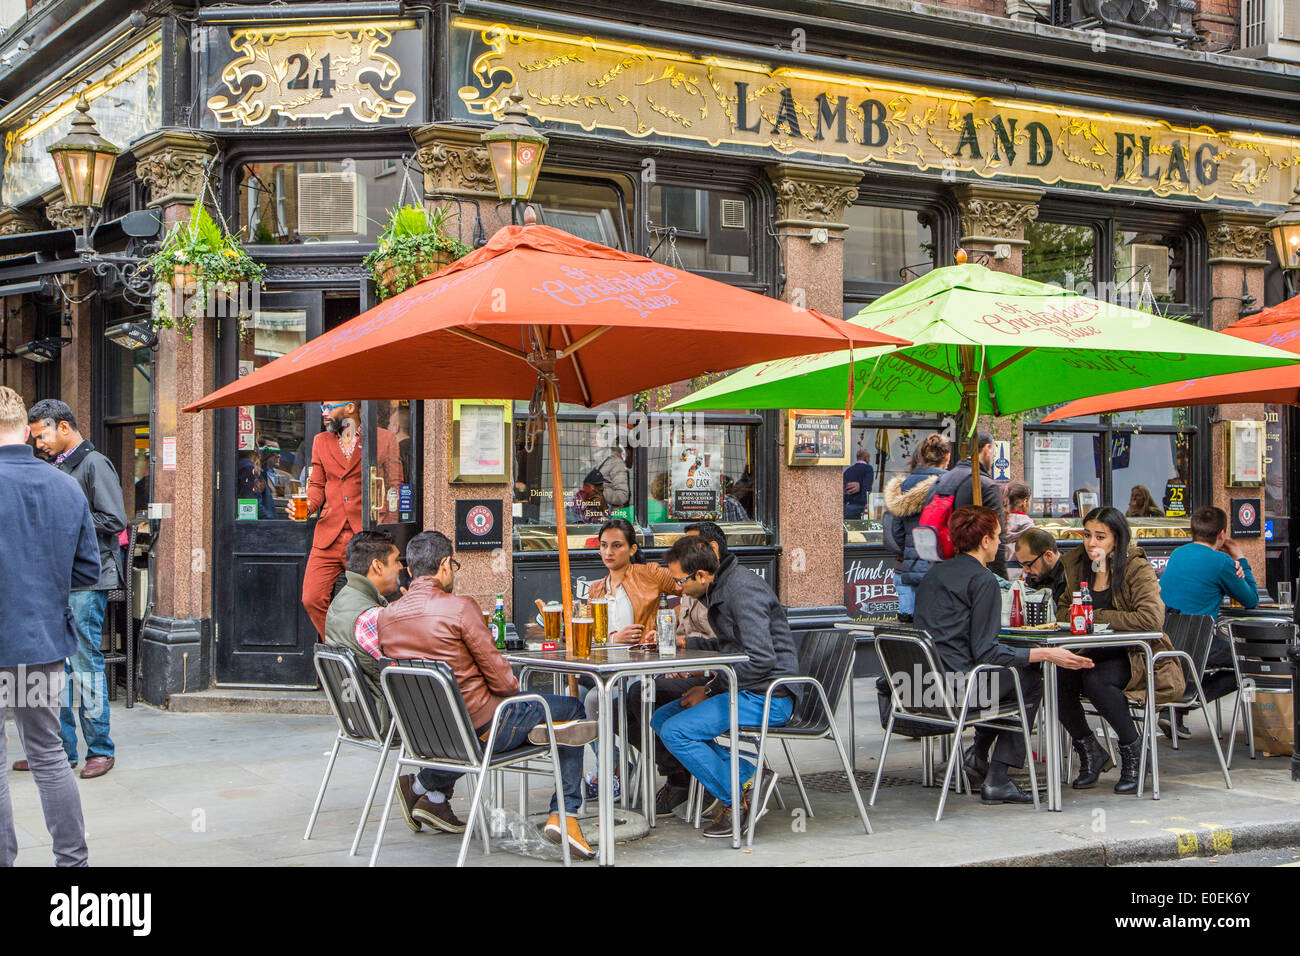 An outside view of the Lamb and Flag Pub, James St, London Stock Photo